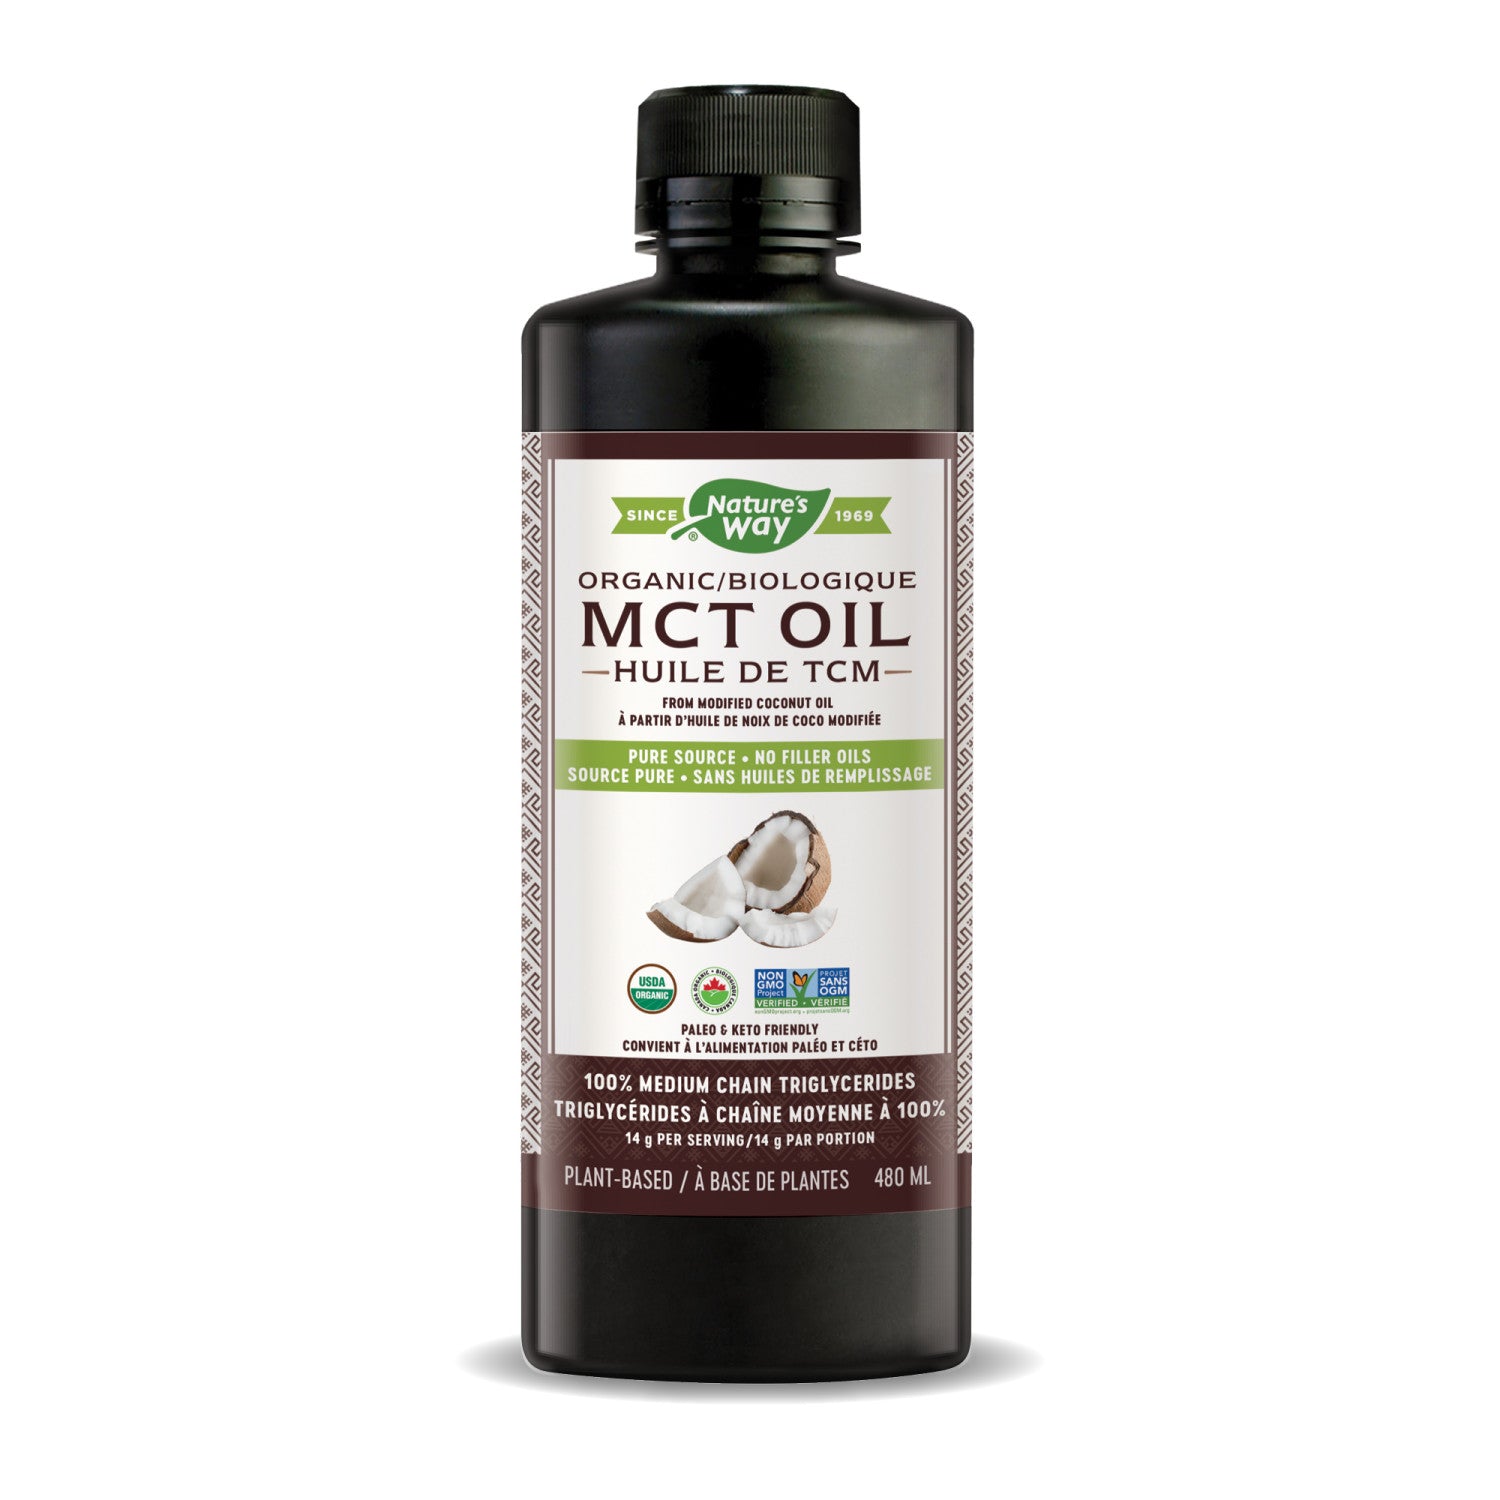 Nature's Way 100% MCT Oil From Coconut, Certified Organic / 16 fl oz (480 ml)